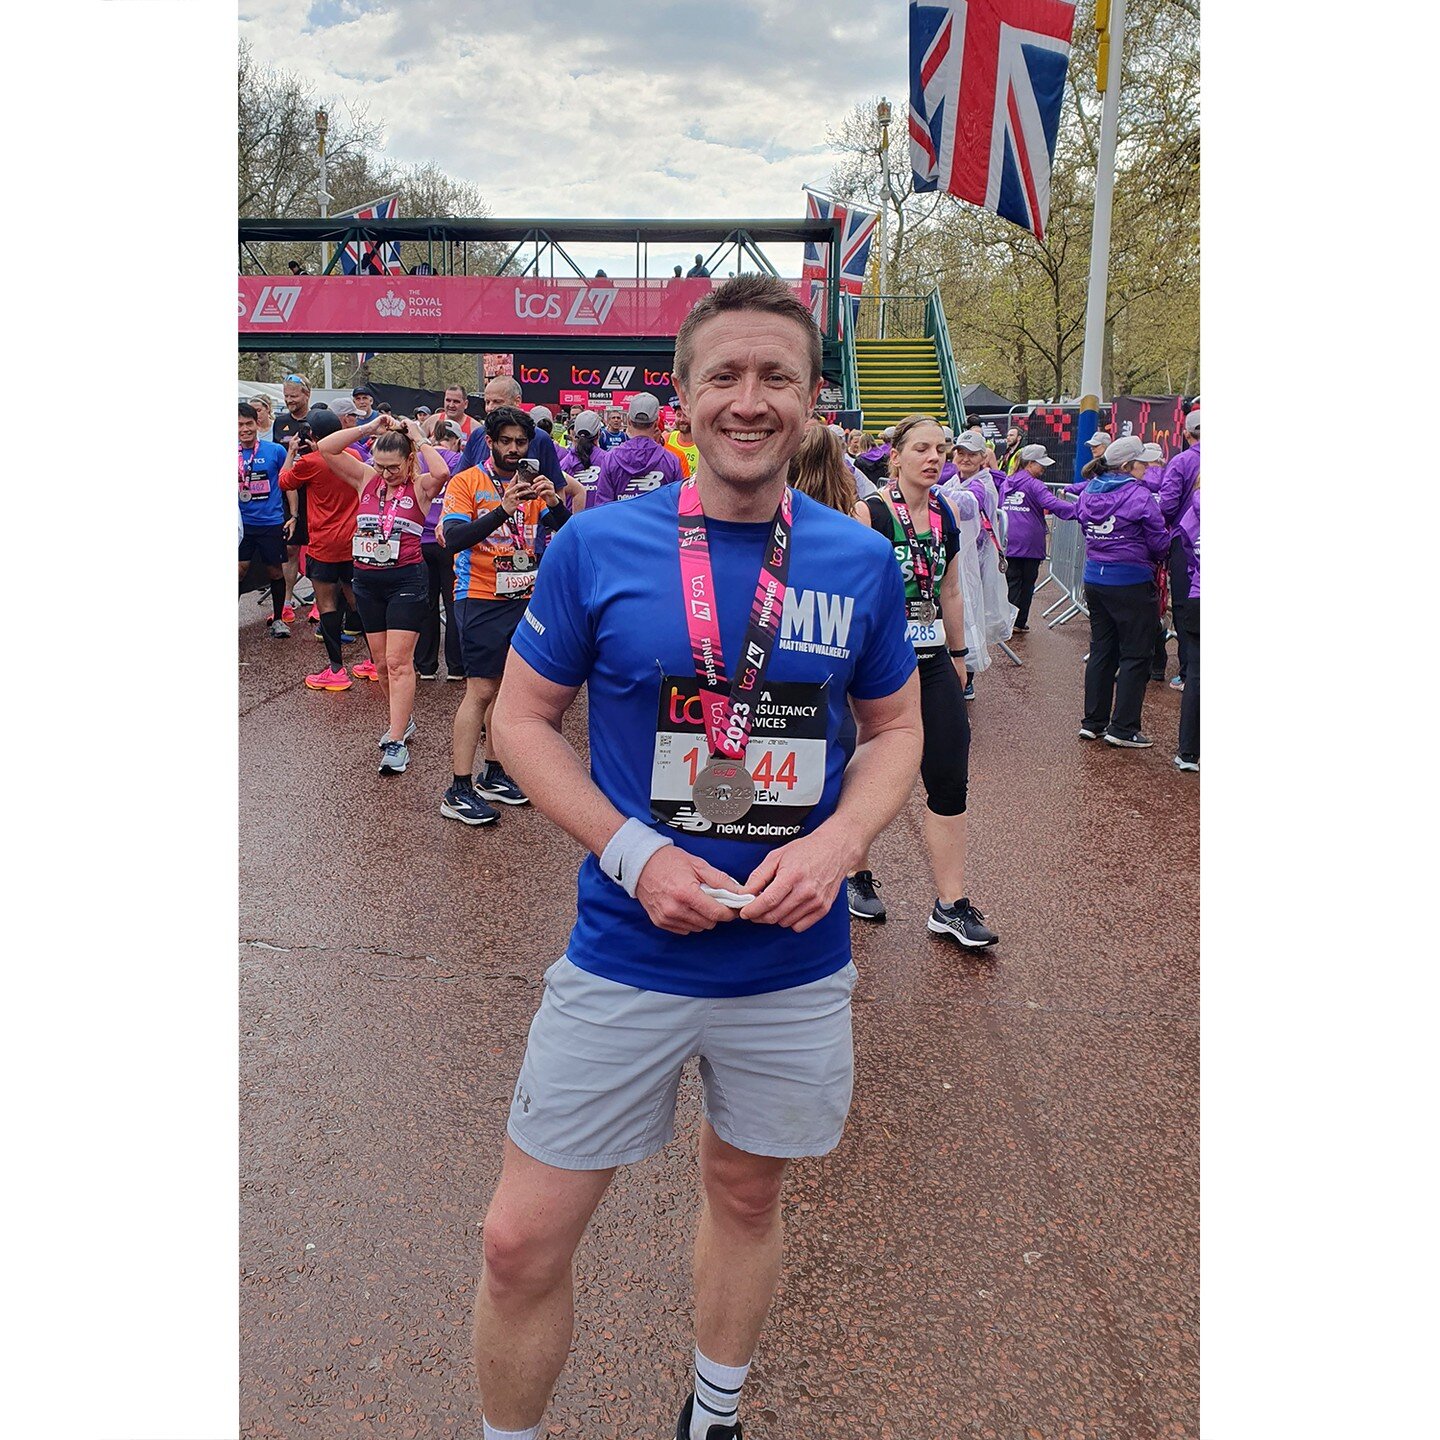 Brutal and brilliant afternoon at The London Marathon (@londonmarathon) on Sunday. 

Thank you Rooster (@graememrooney), Sterns (@katiebernsteinuk), His Smallness (@paulcharlton01), Becky (@beckyholly22) &amp; everyone who sent their love and support